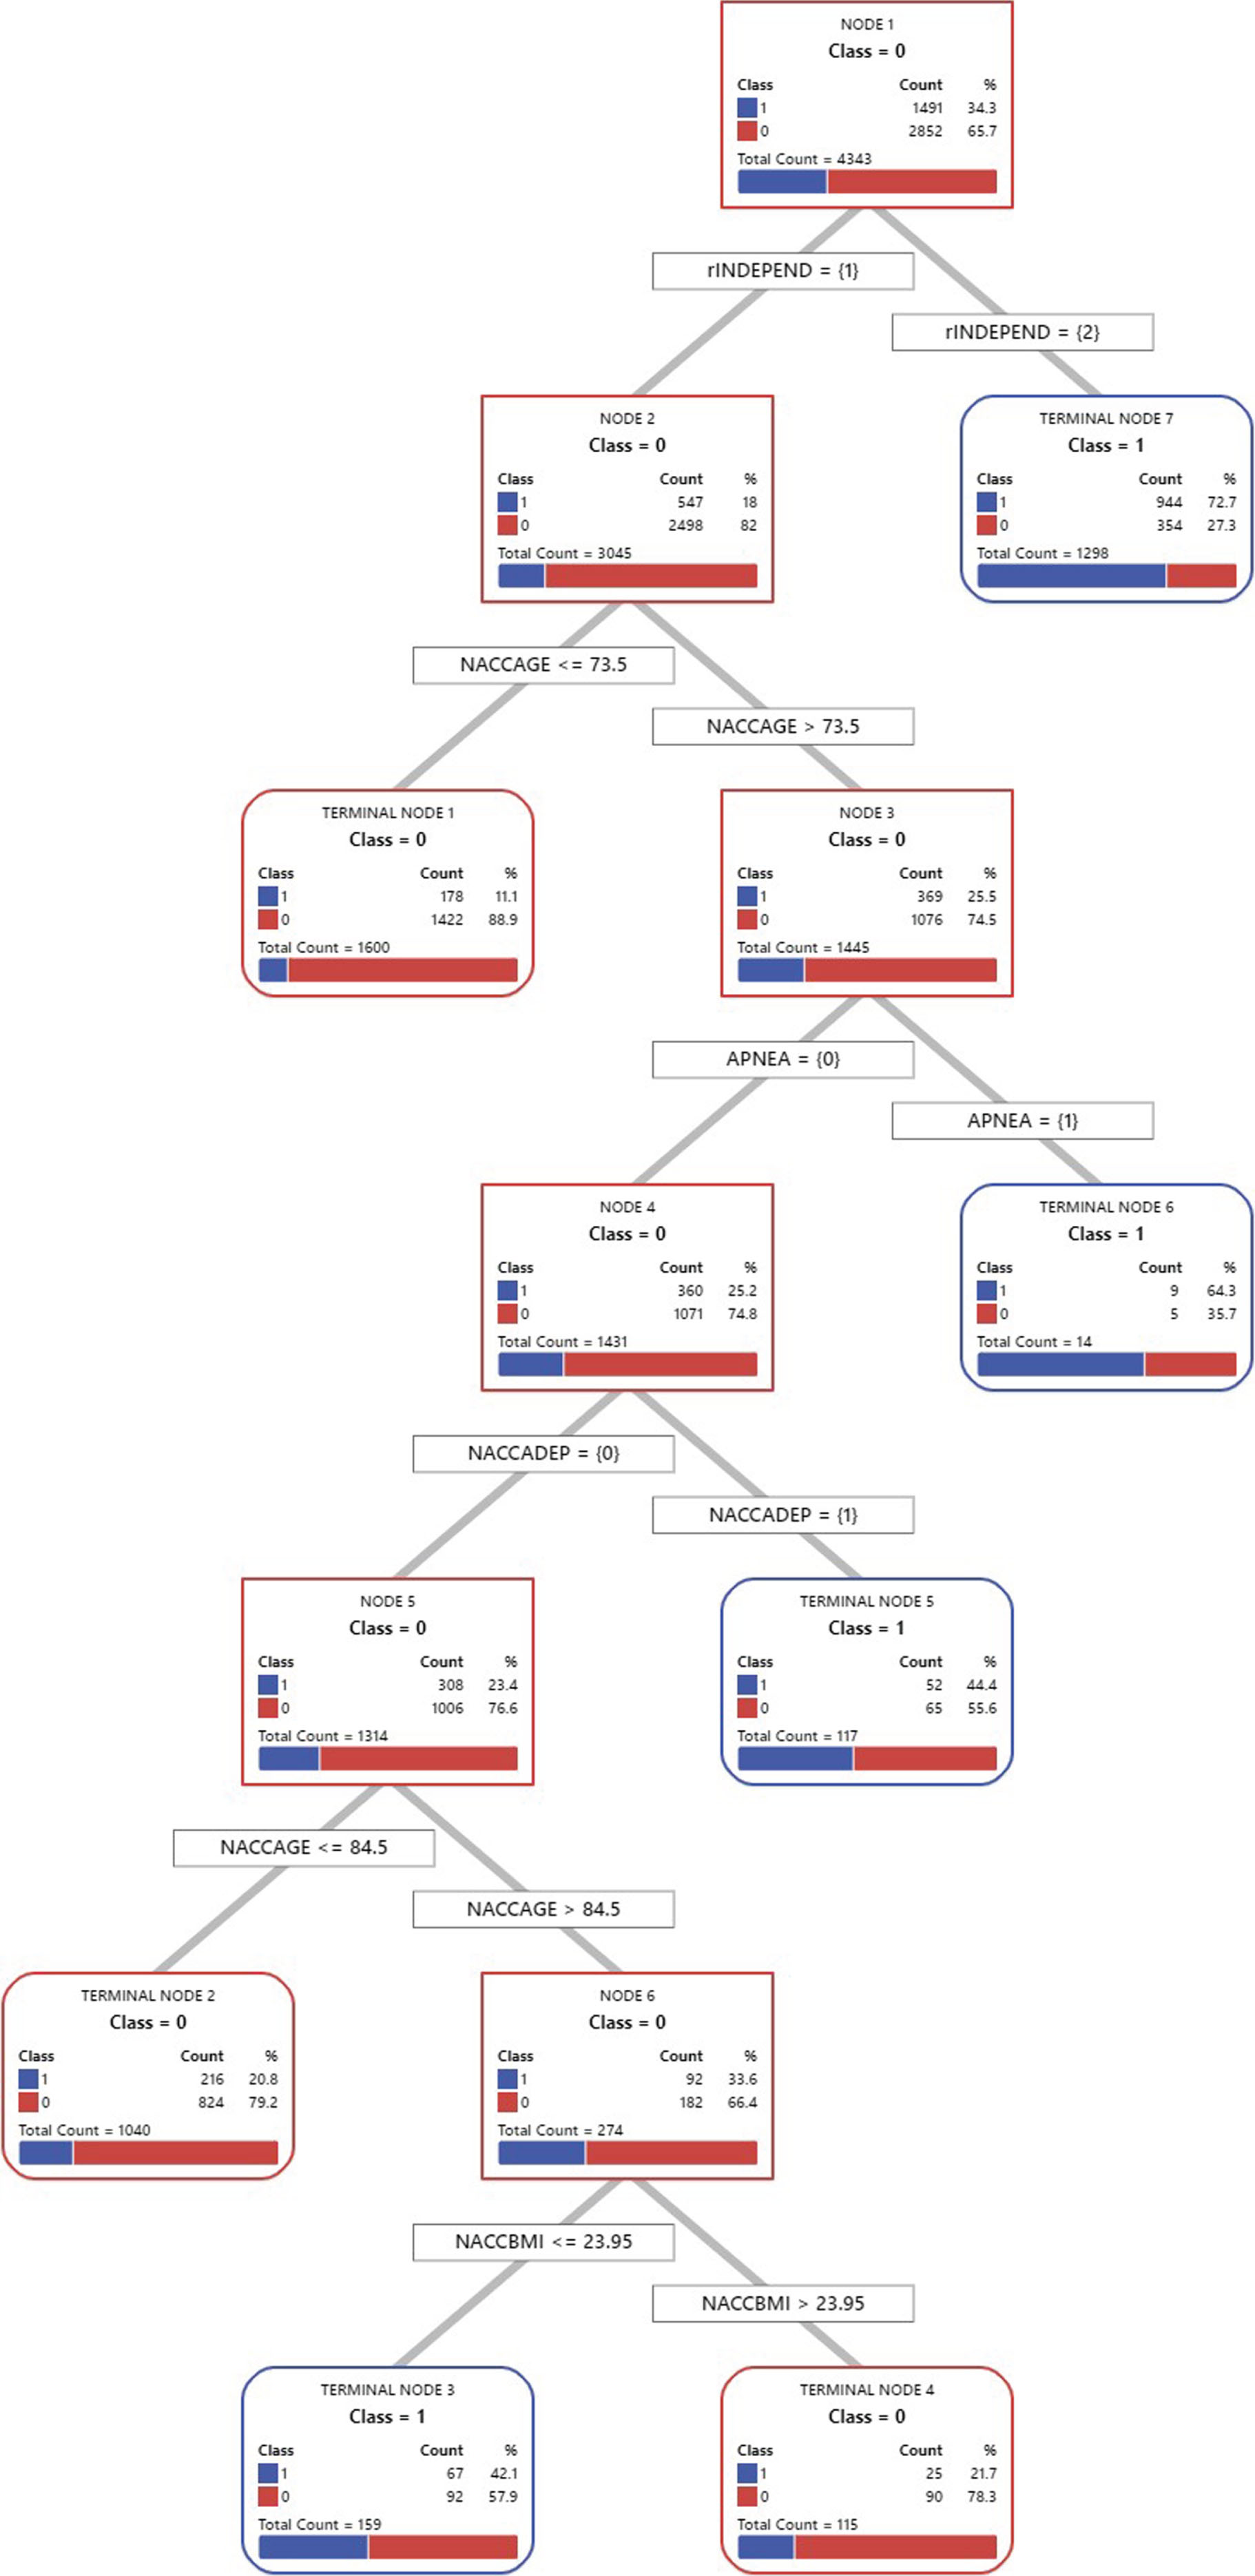 Classification and Regression Tree of Alzheimer’s Disease among Asian Americans. rINDEPEND, level of independence; NACCAGE, subject’s age; APNEA, sleep apnea history; NACCADEP, use of antidepressant; NACCBMI, body mass index.